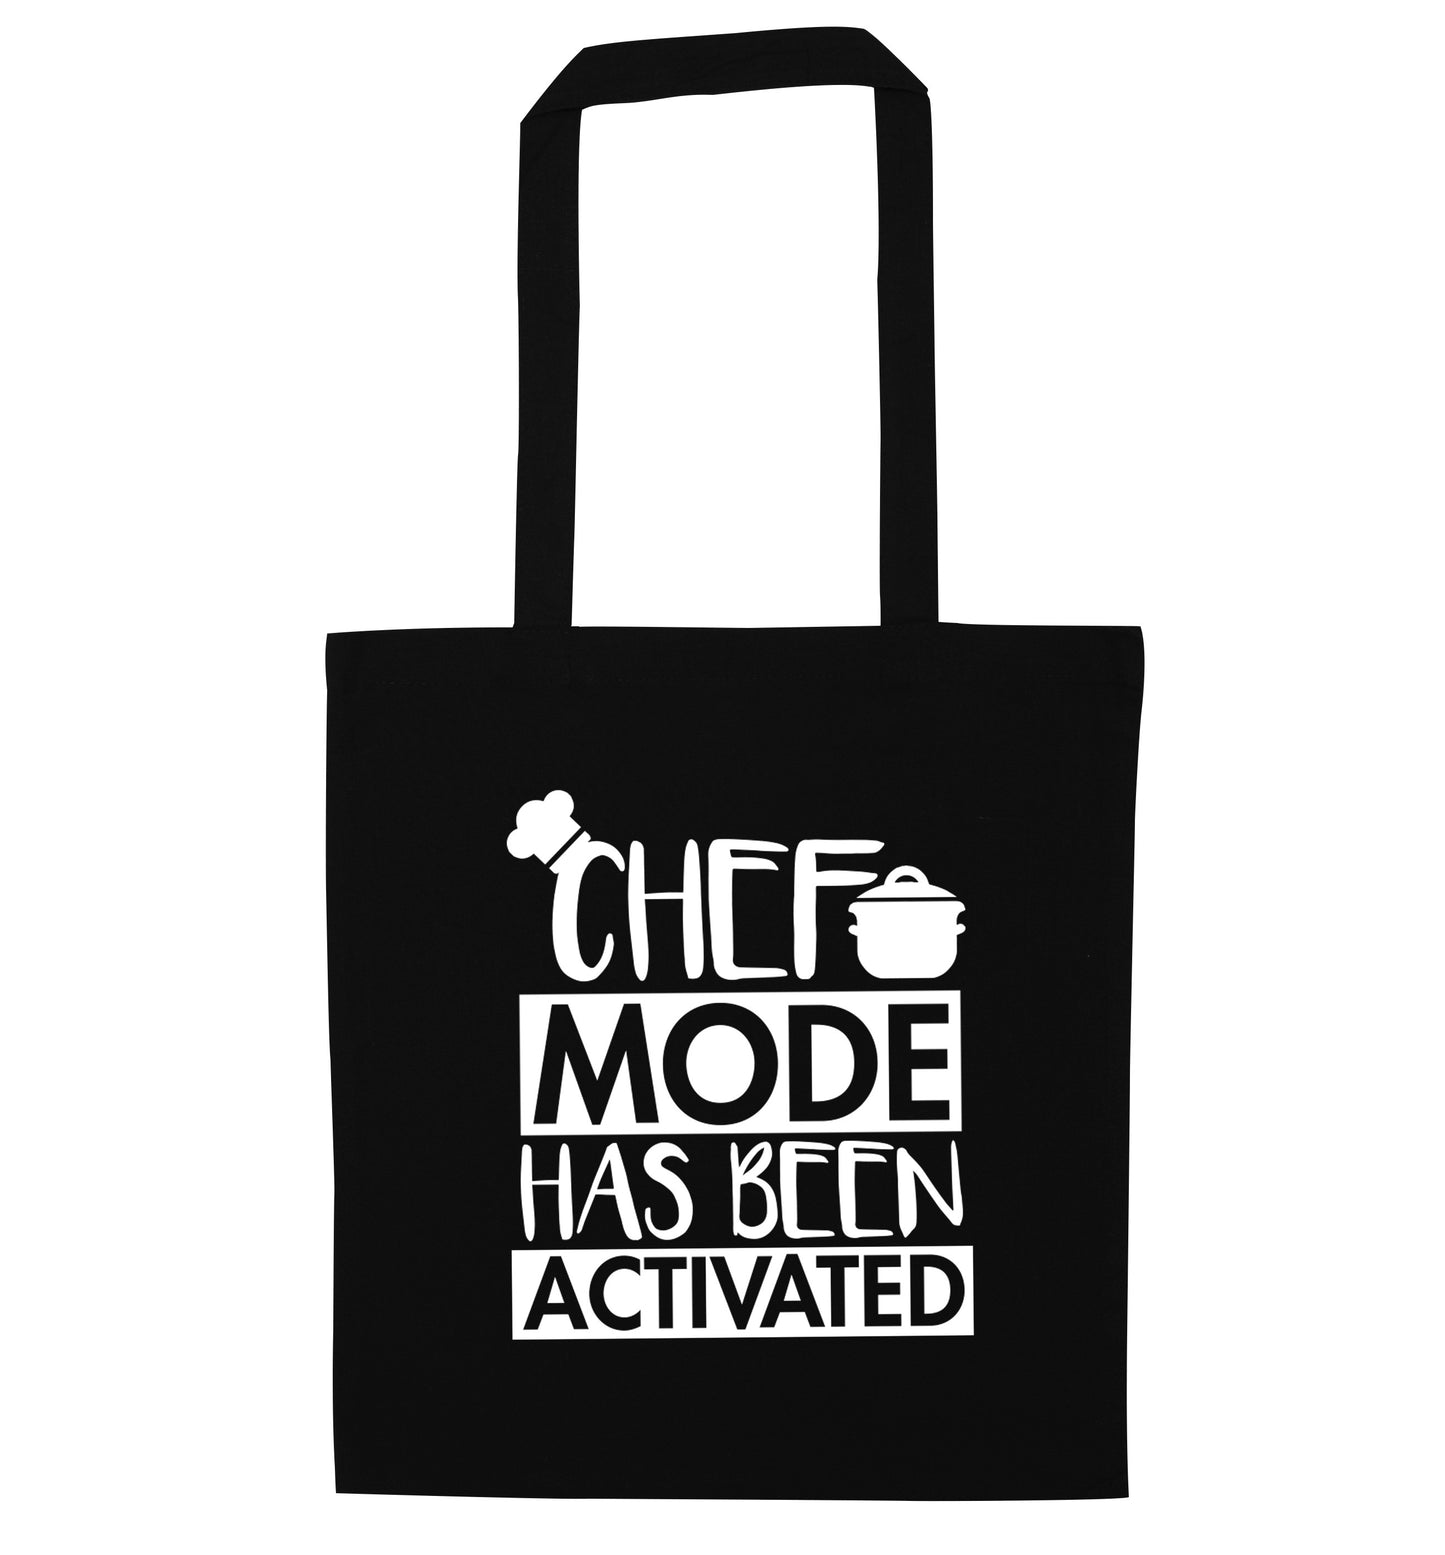 Chef mode has been activated black tote bag